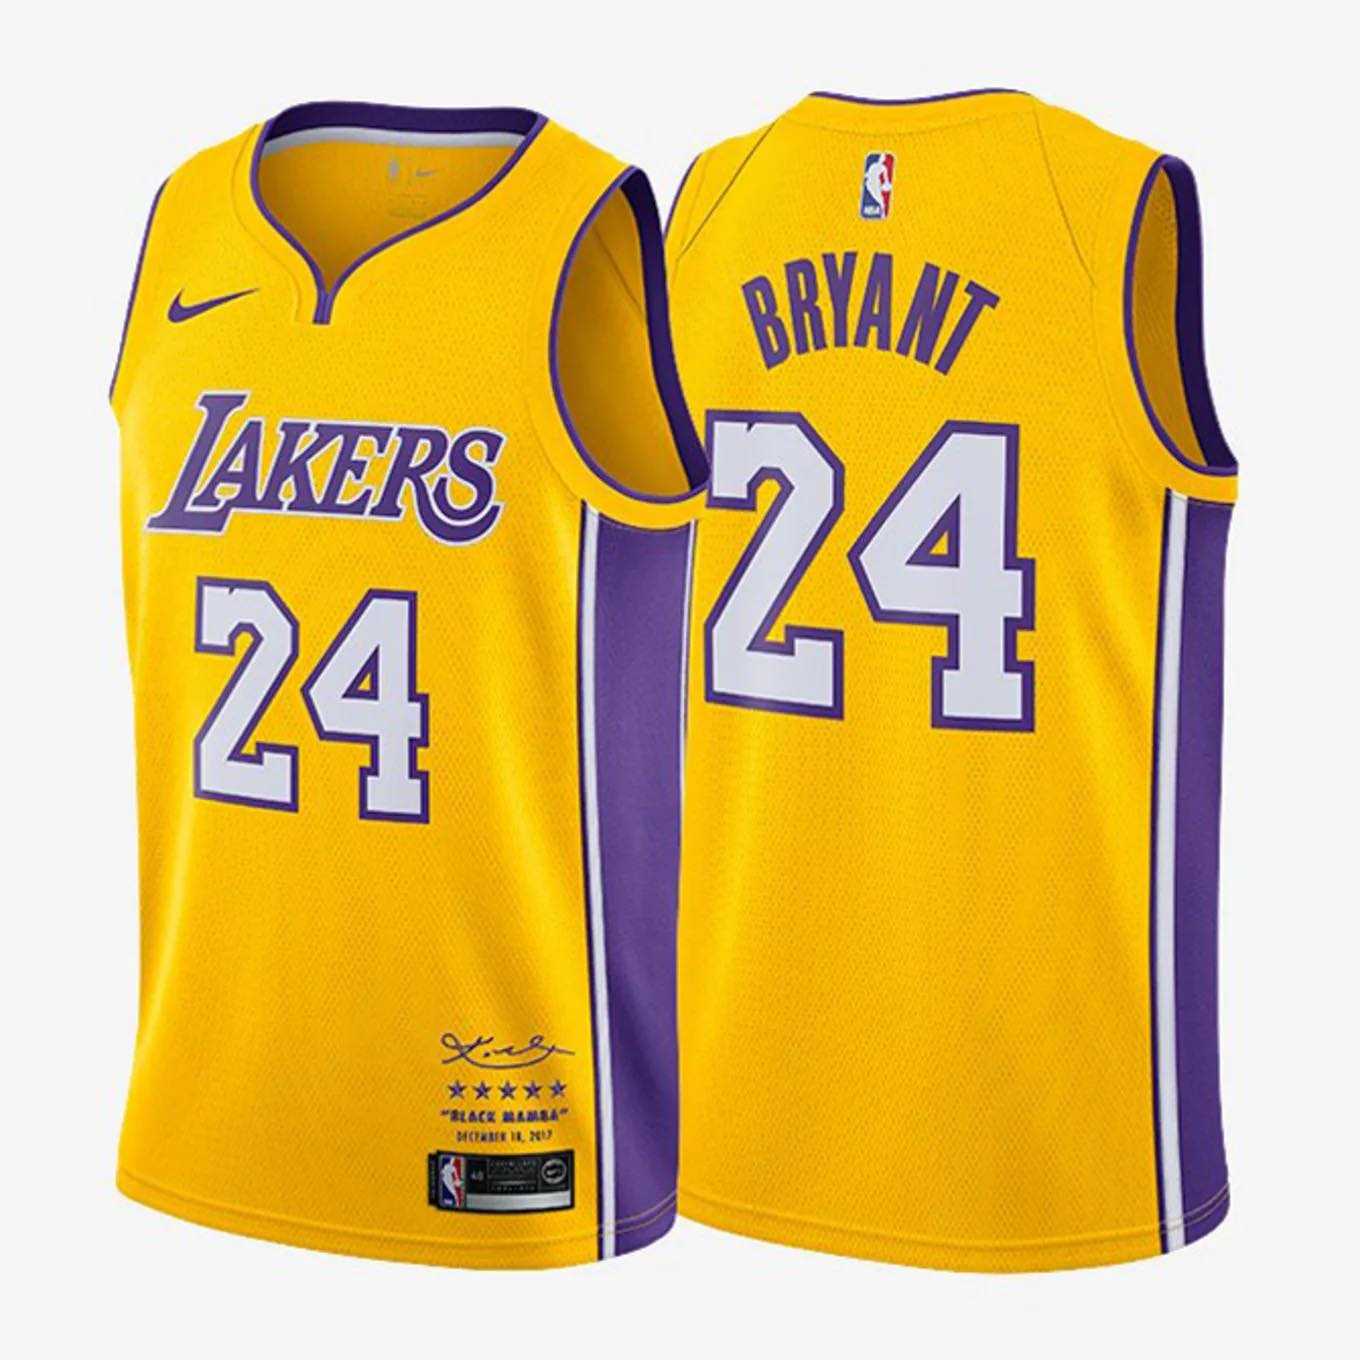 lakers yellow and black jersey